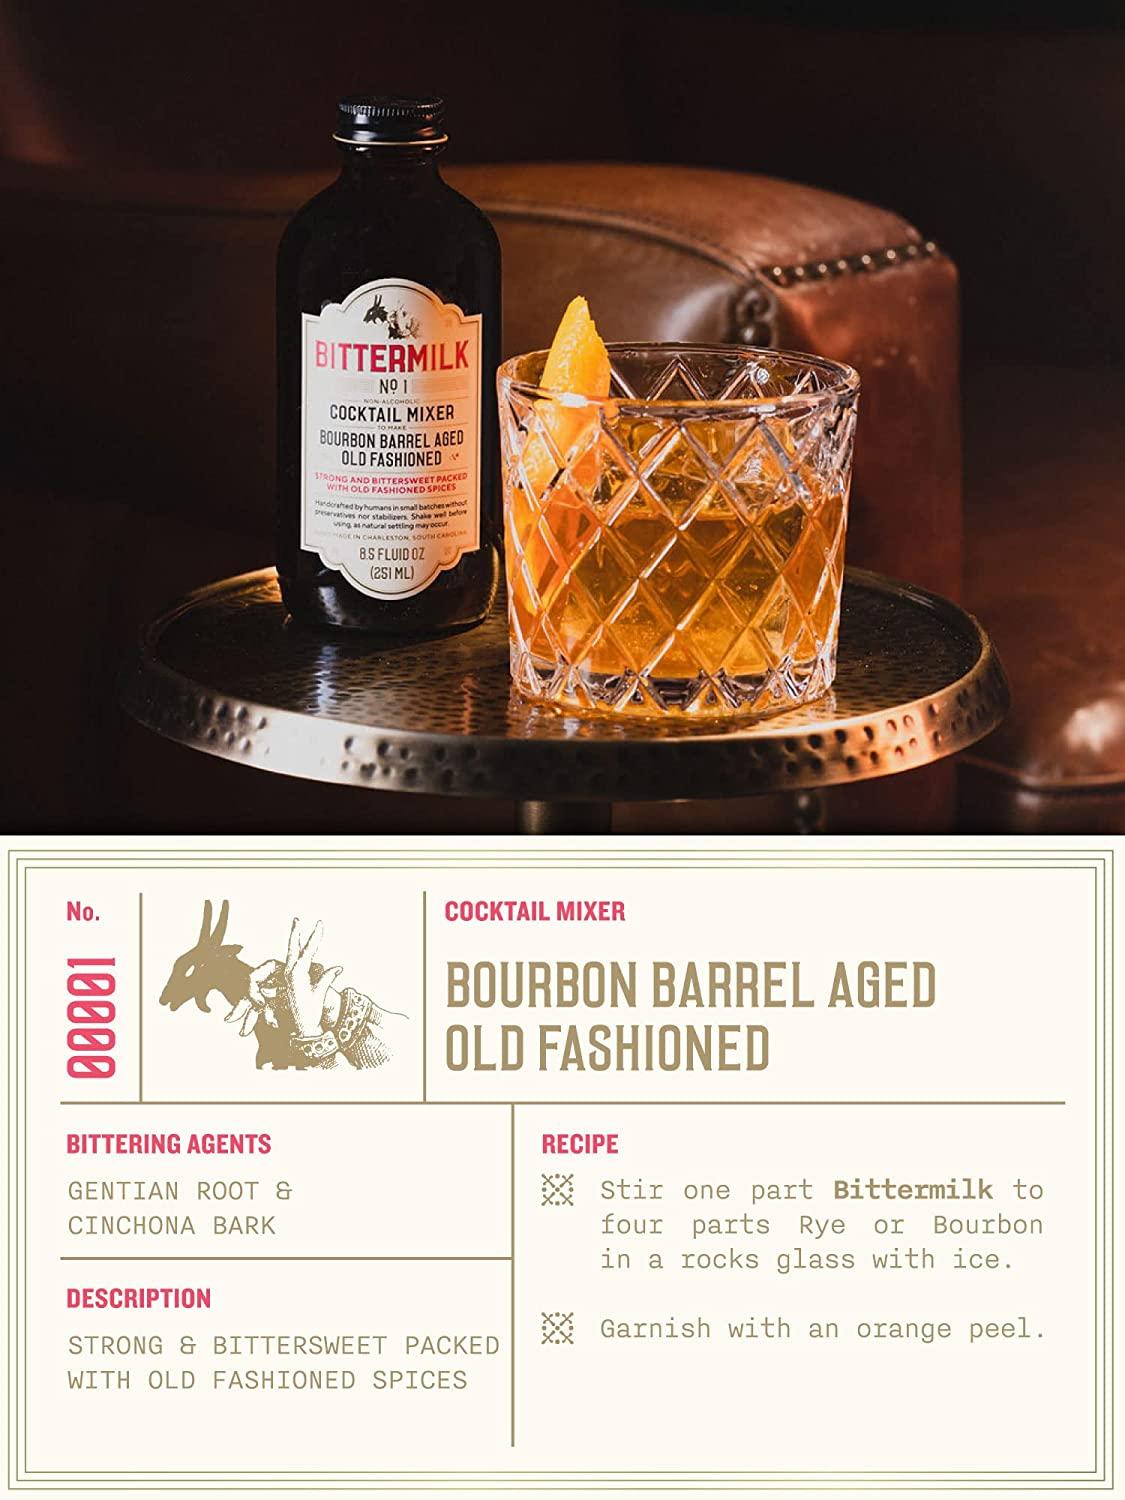 Bittermilk No.1 Bourbon Barrel Aged Old Fashioned Mix - All Natural  Handcrafted Cocktail Mixer - Old Fashioned Drink Mixer - Just Add Bourbon  or Whiskey Makes 17 Cocktails